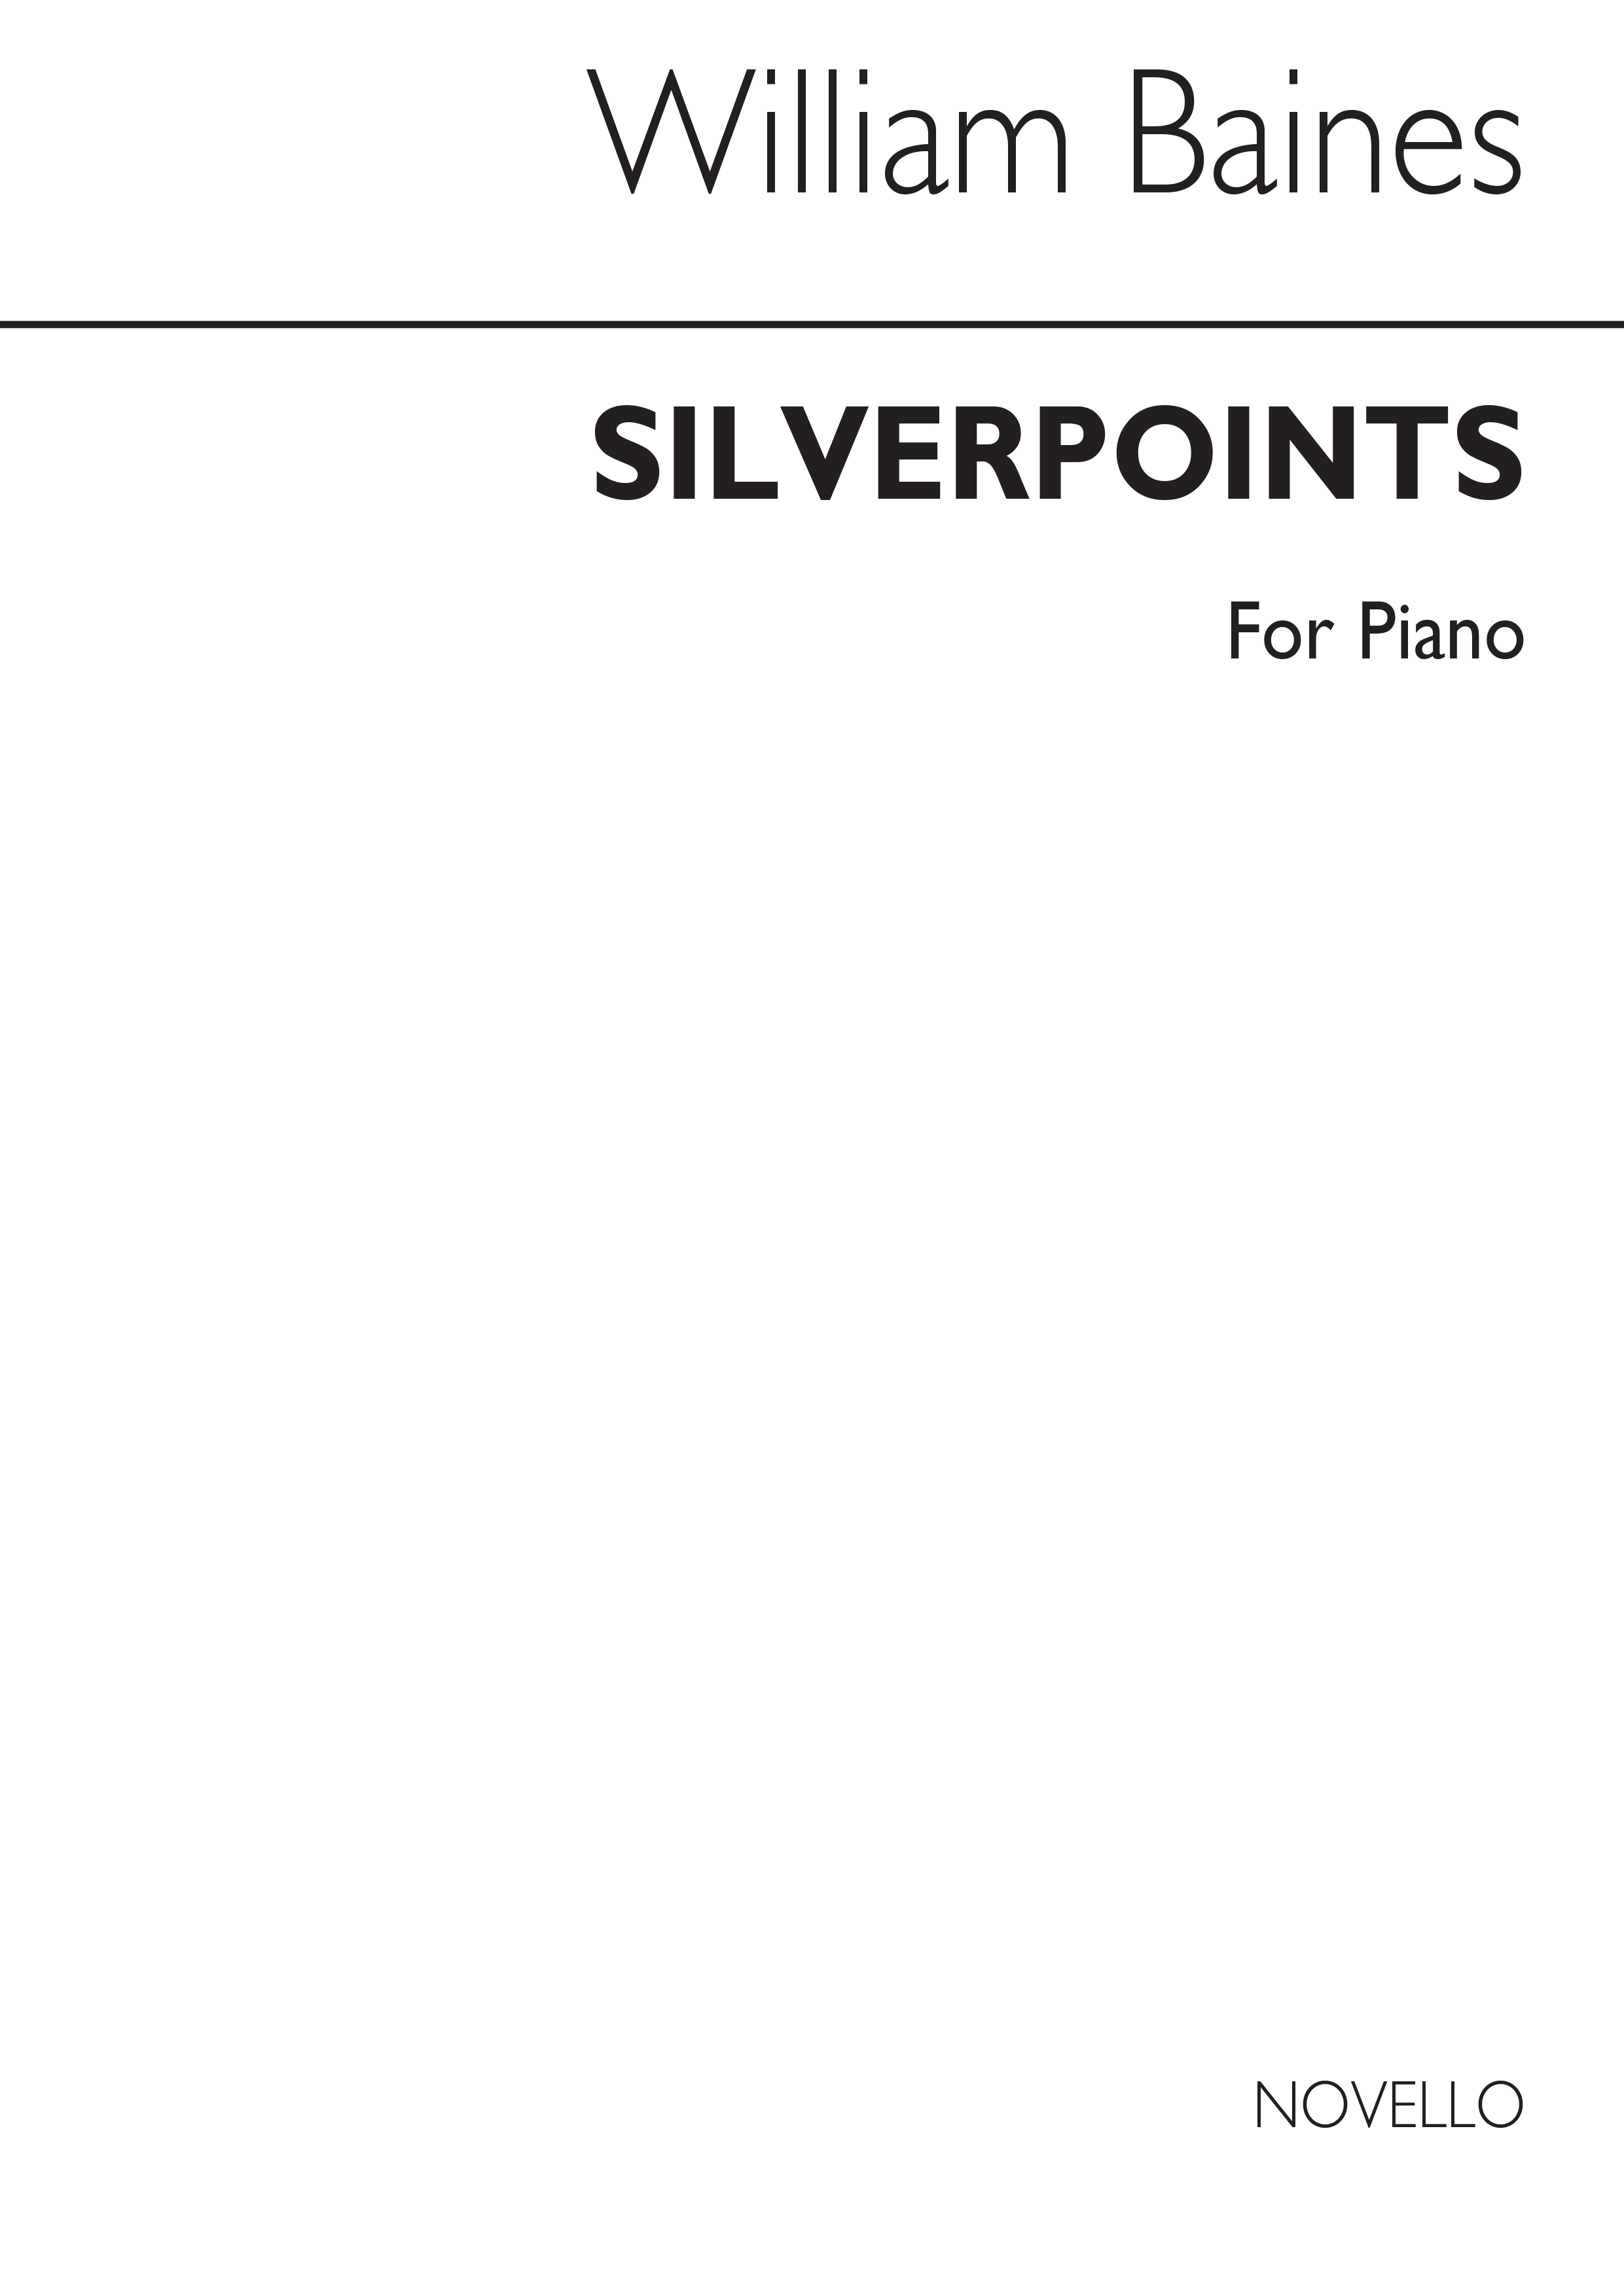 William Baines: Silverpoints - 4 Pieces For Pianoforte: Piano: Instrumental